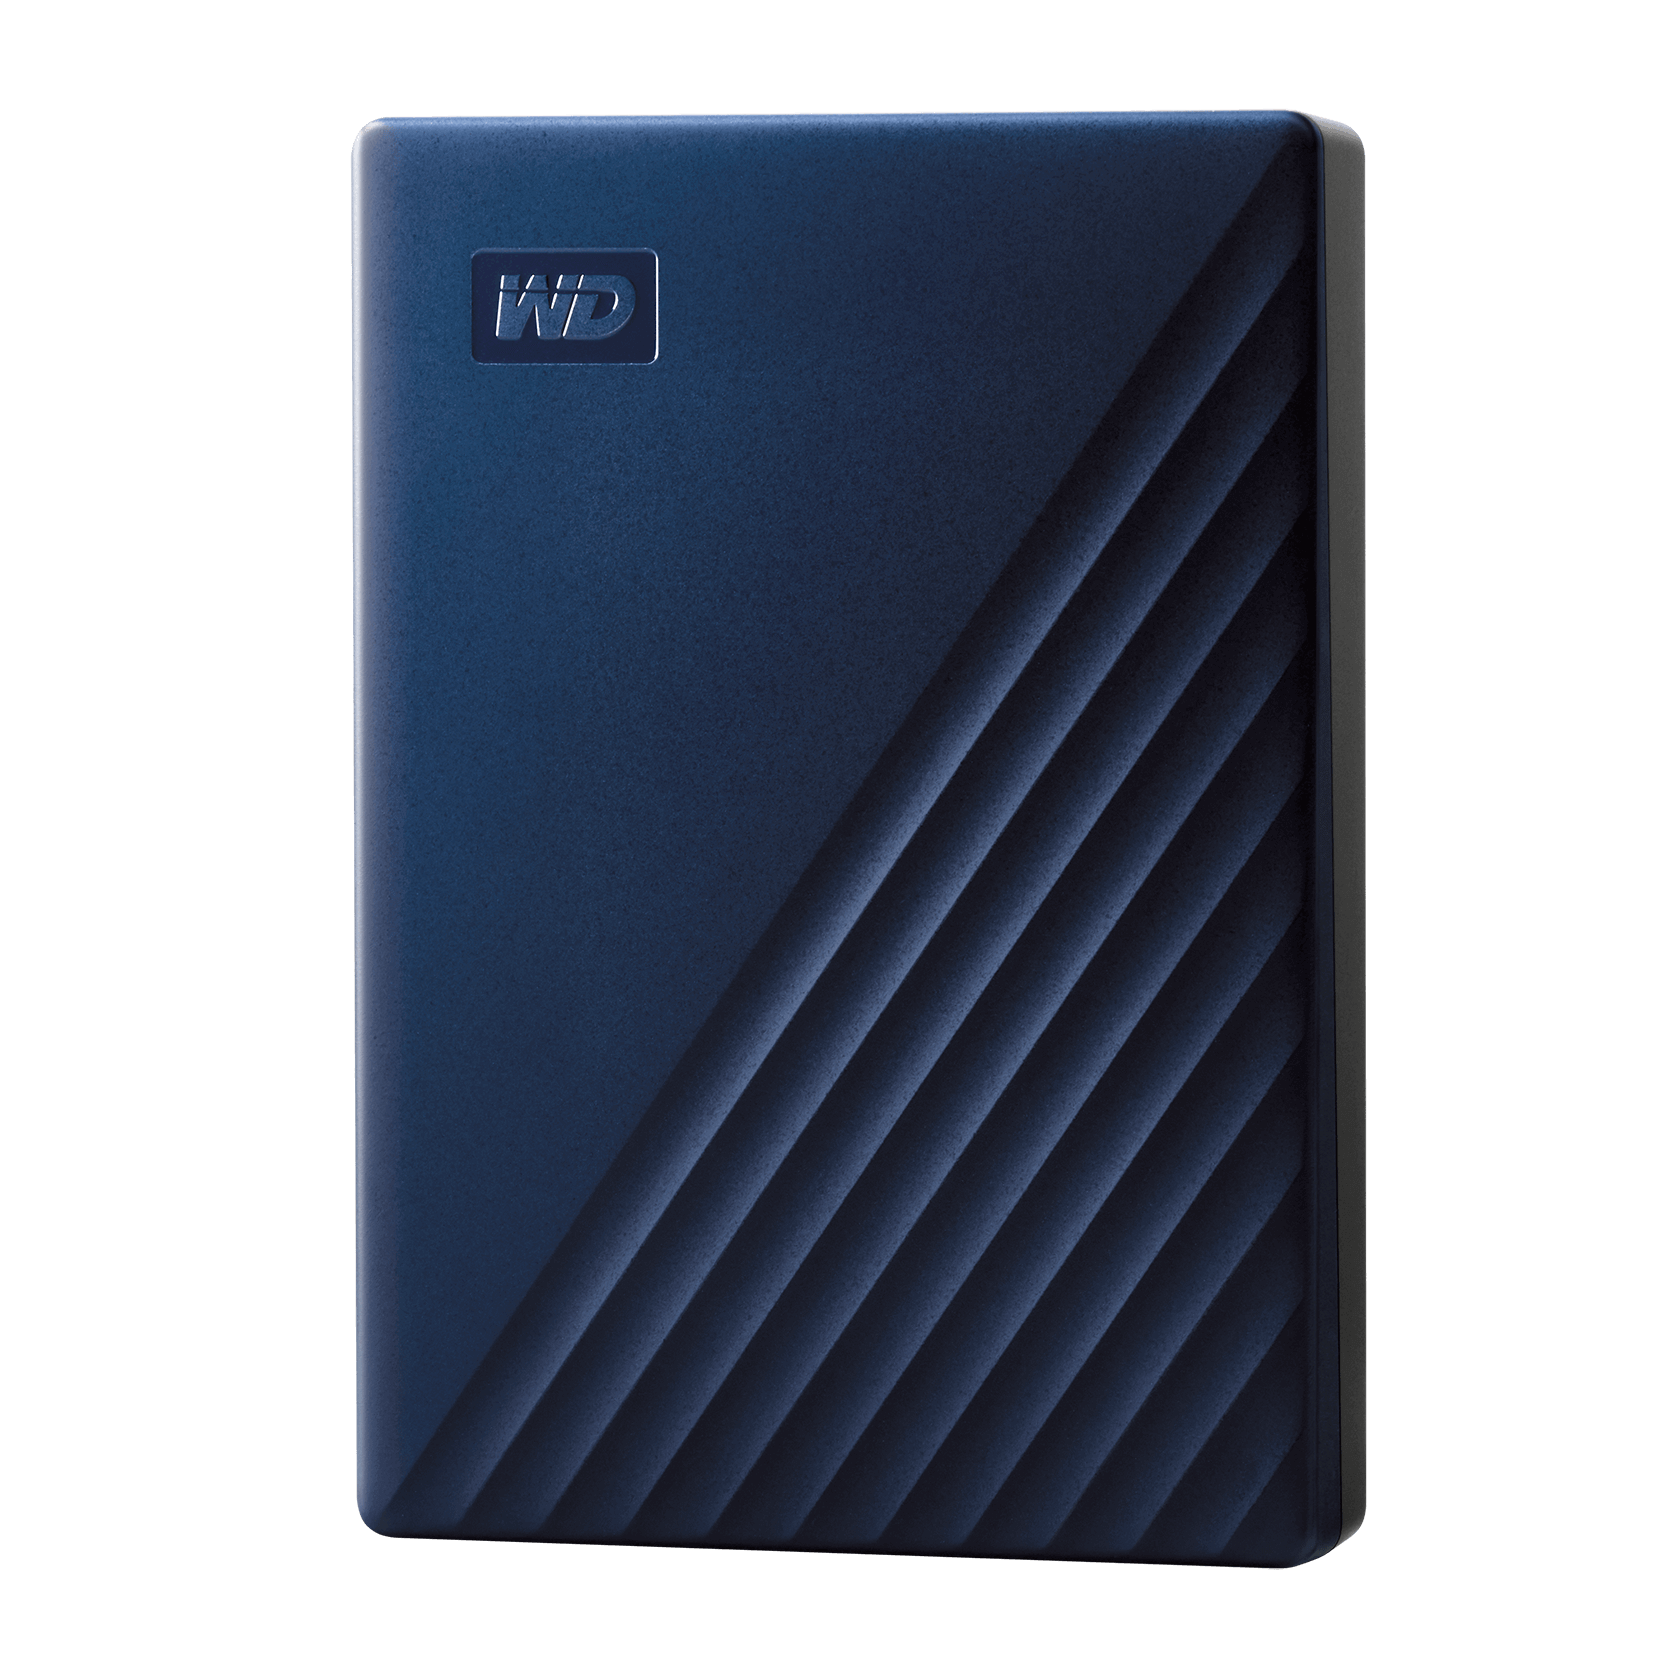 WD 4TB My Passport for Mac, Portable External Hard Drive, Blue - WDBA2F0040BBL-WESN - image 1 of 8